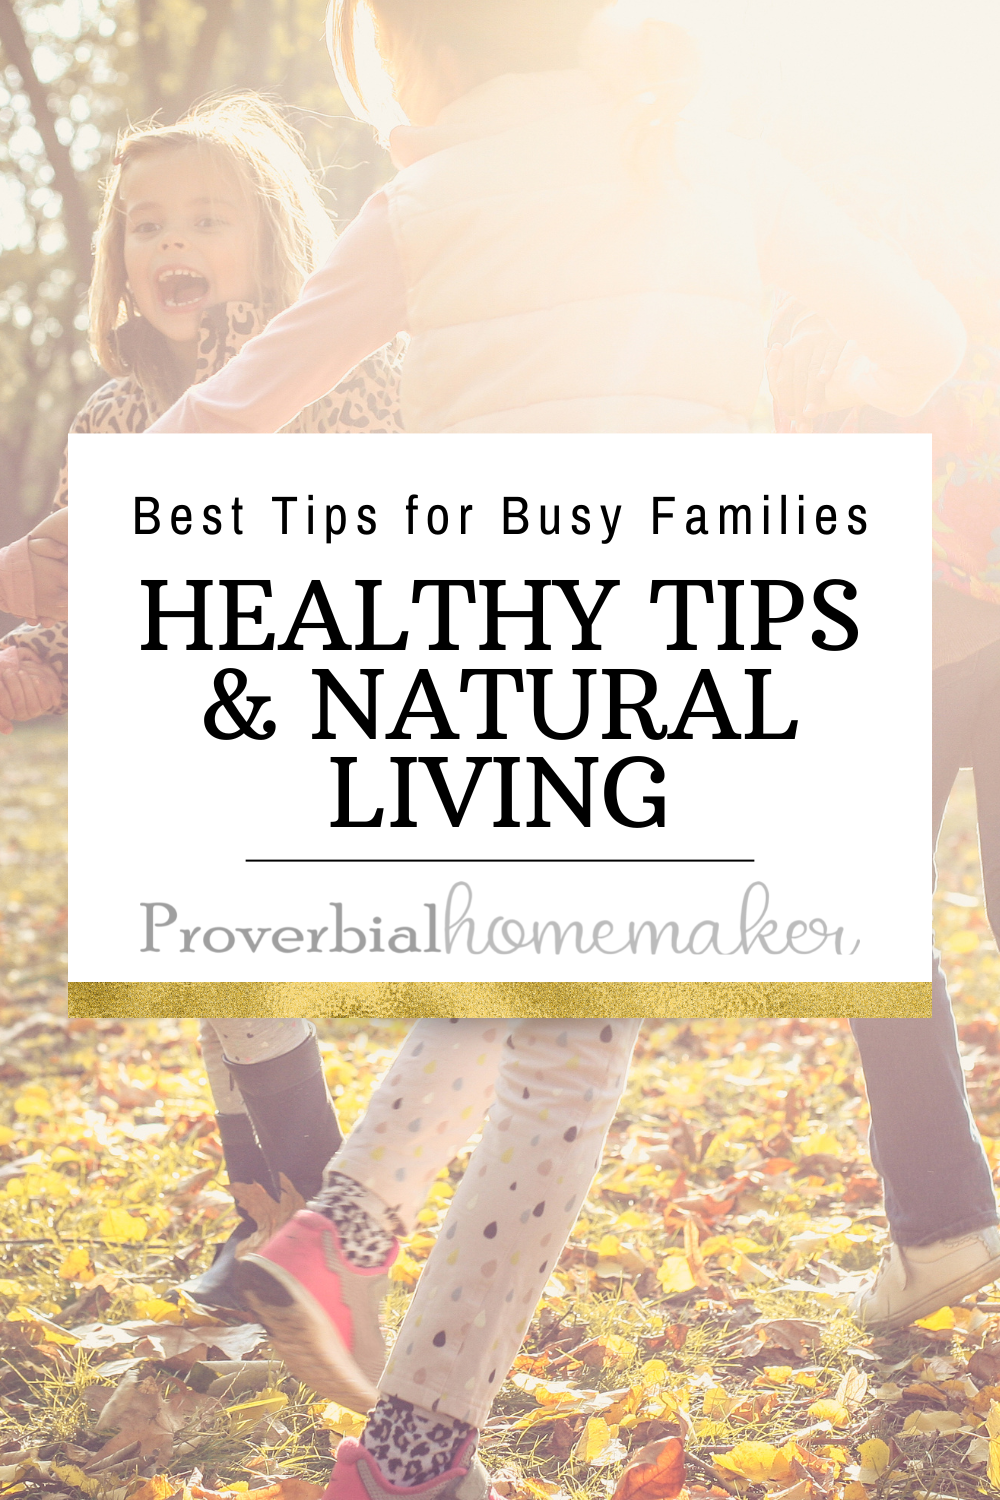 Get healthy naturally with these top tips for natural living for busy families, from Proverbial Homemaker!